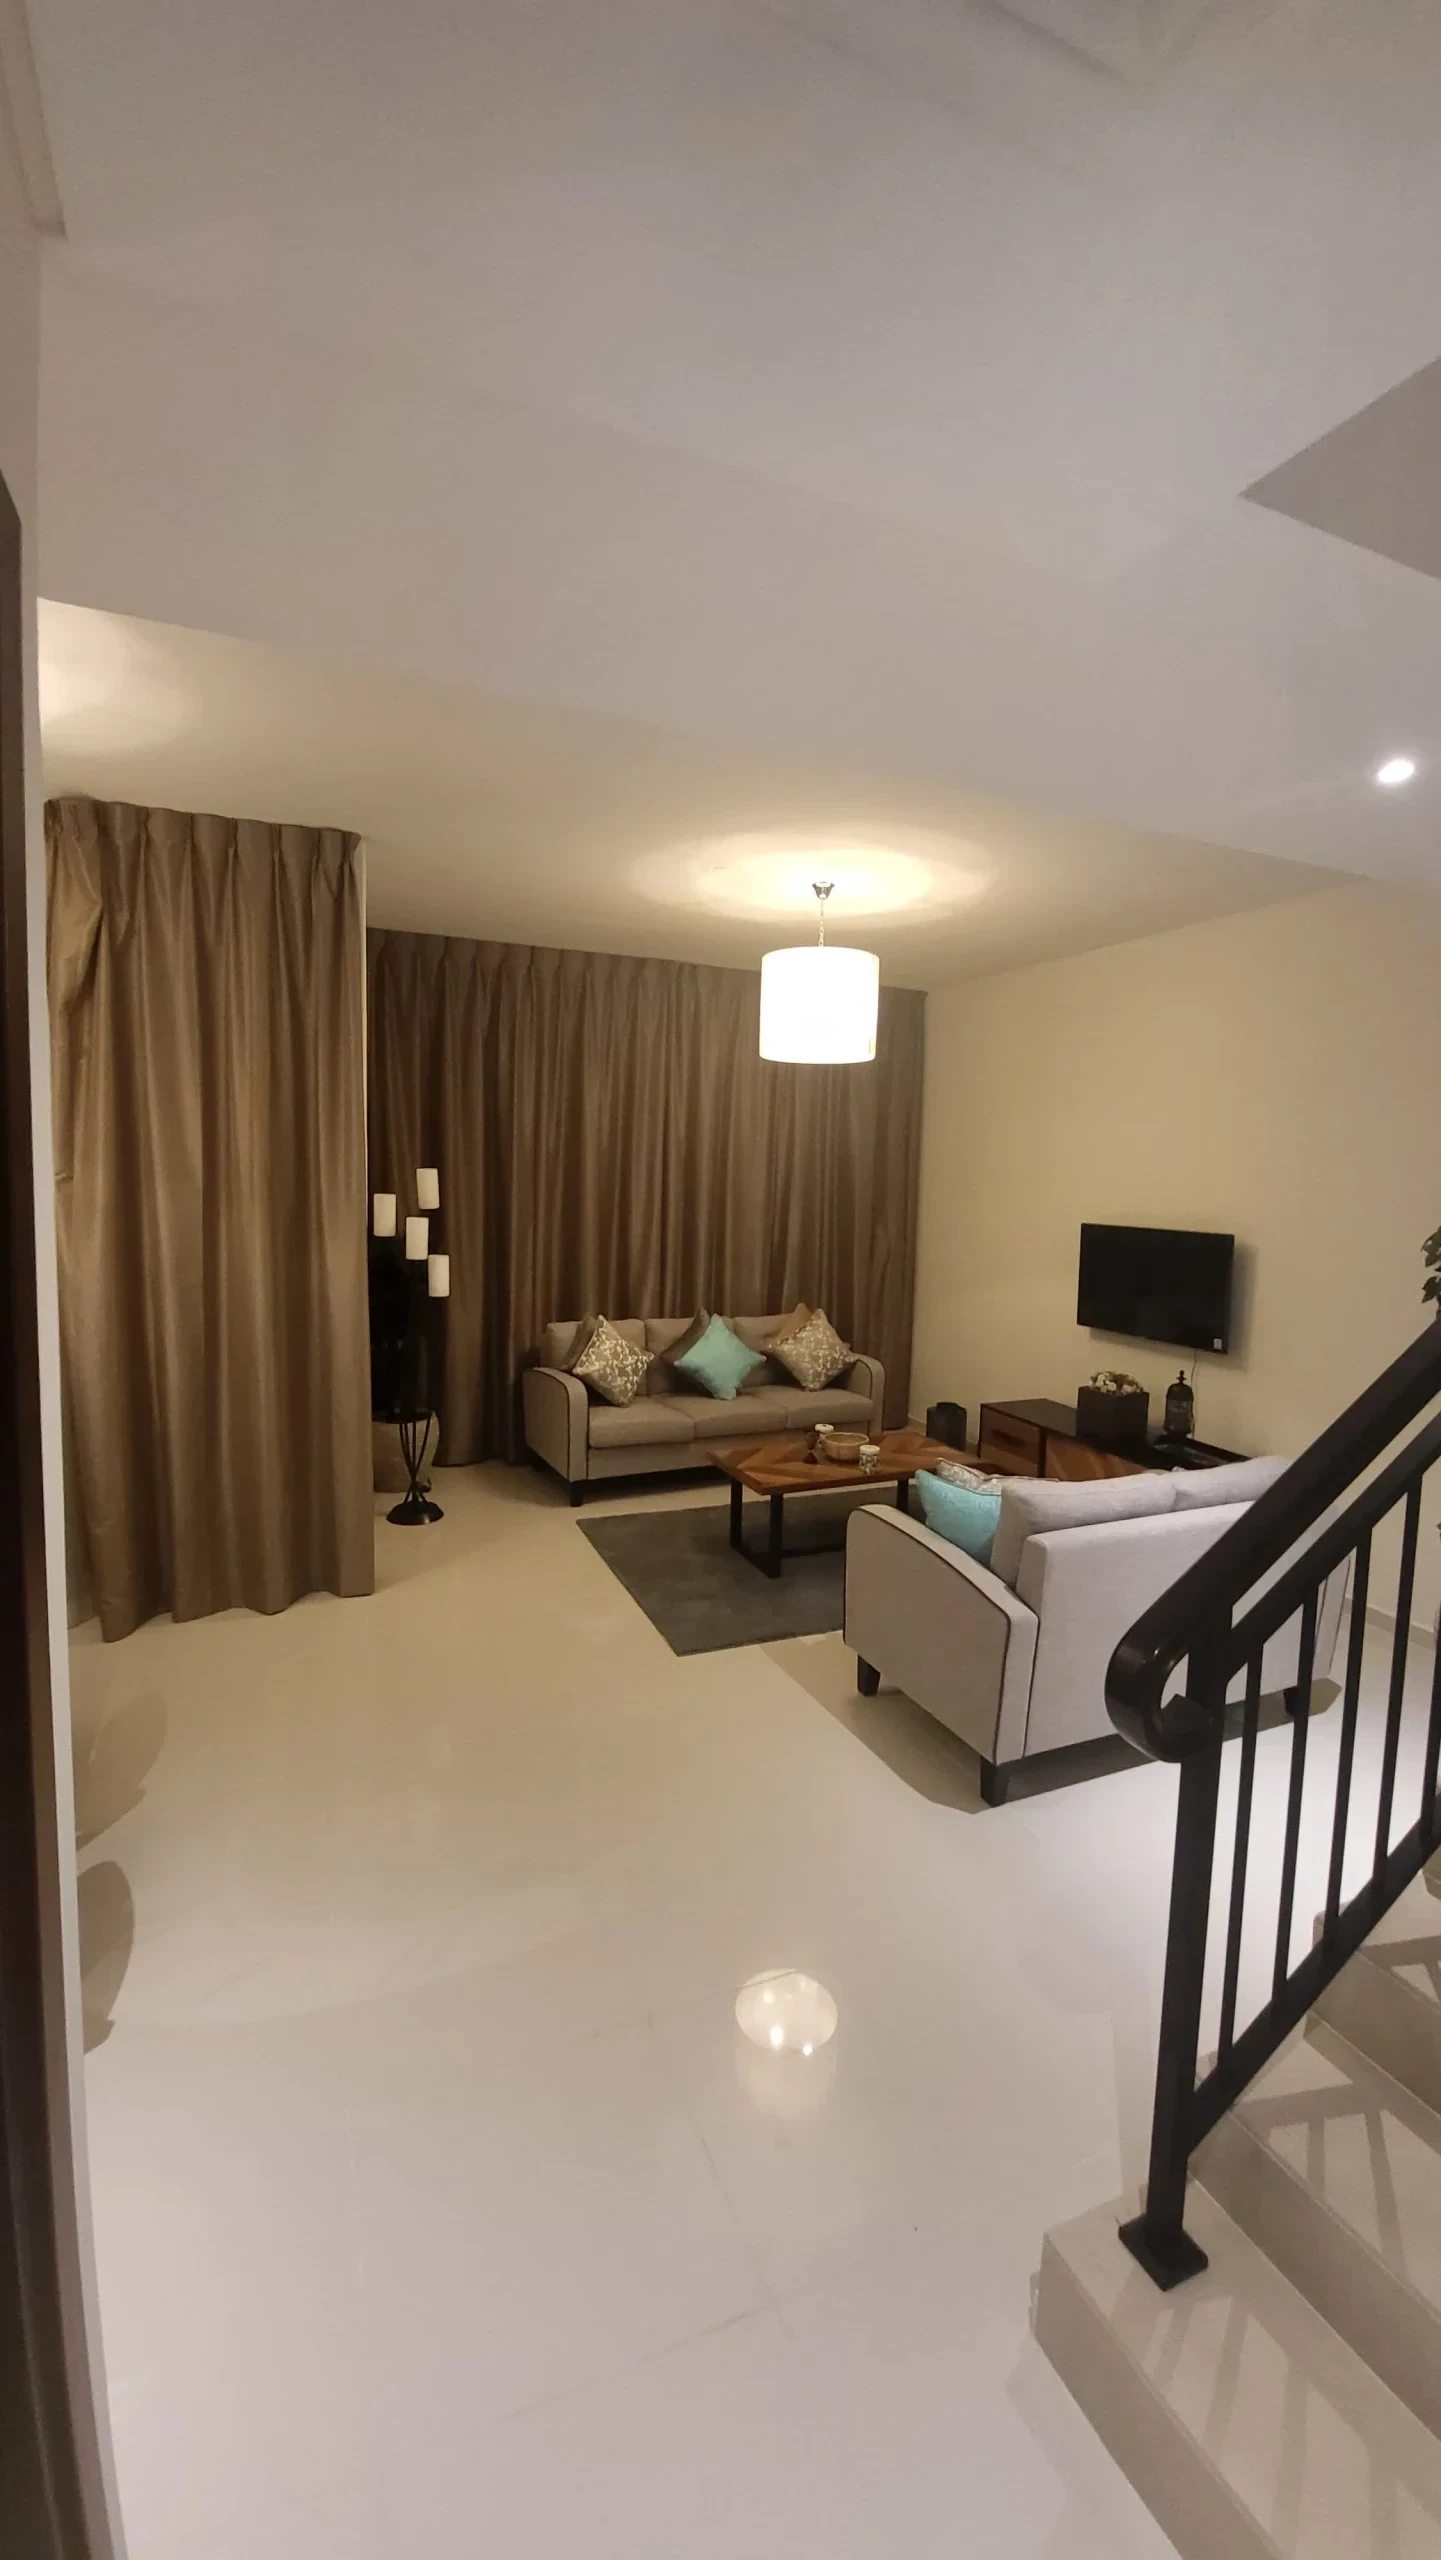 For Sale |3BR+maid | fully furnished 